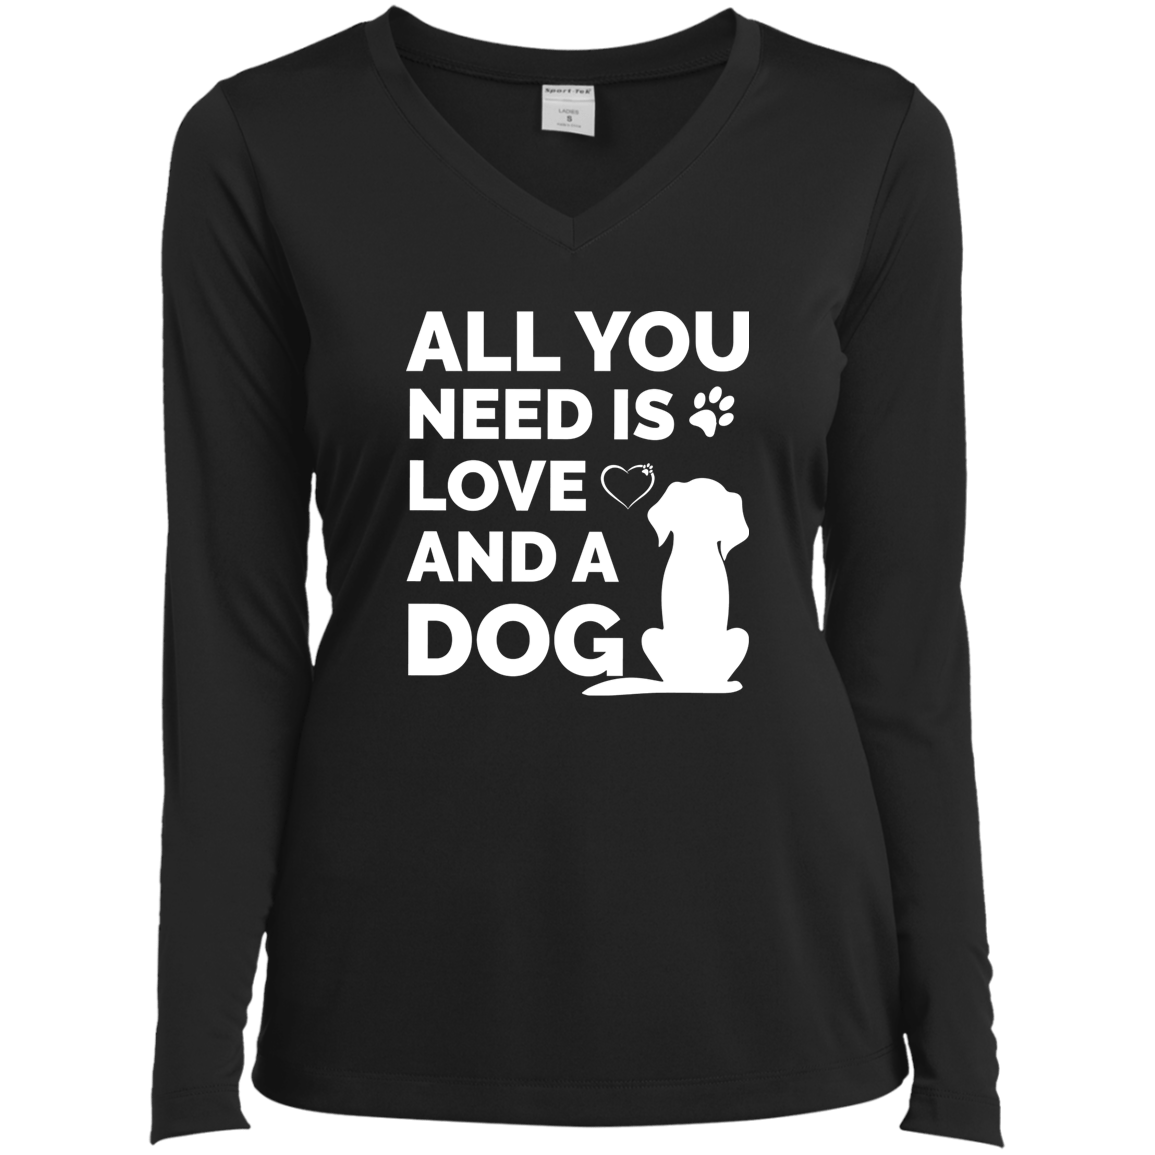 All You Need Is Love And A Dog  - Long Sleeve Ladies V Neck.